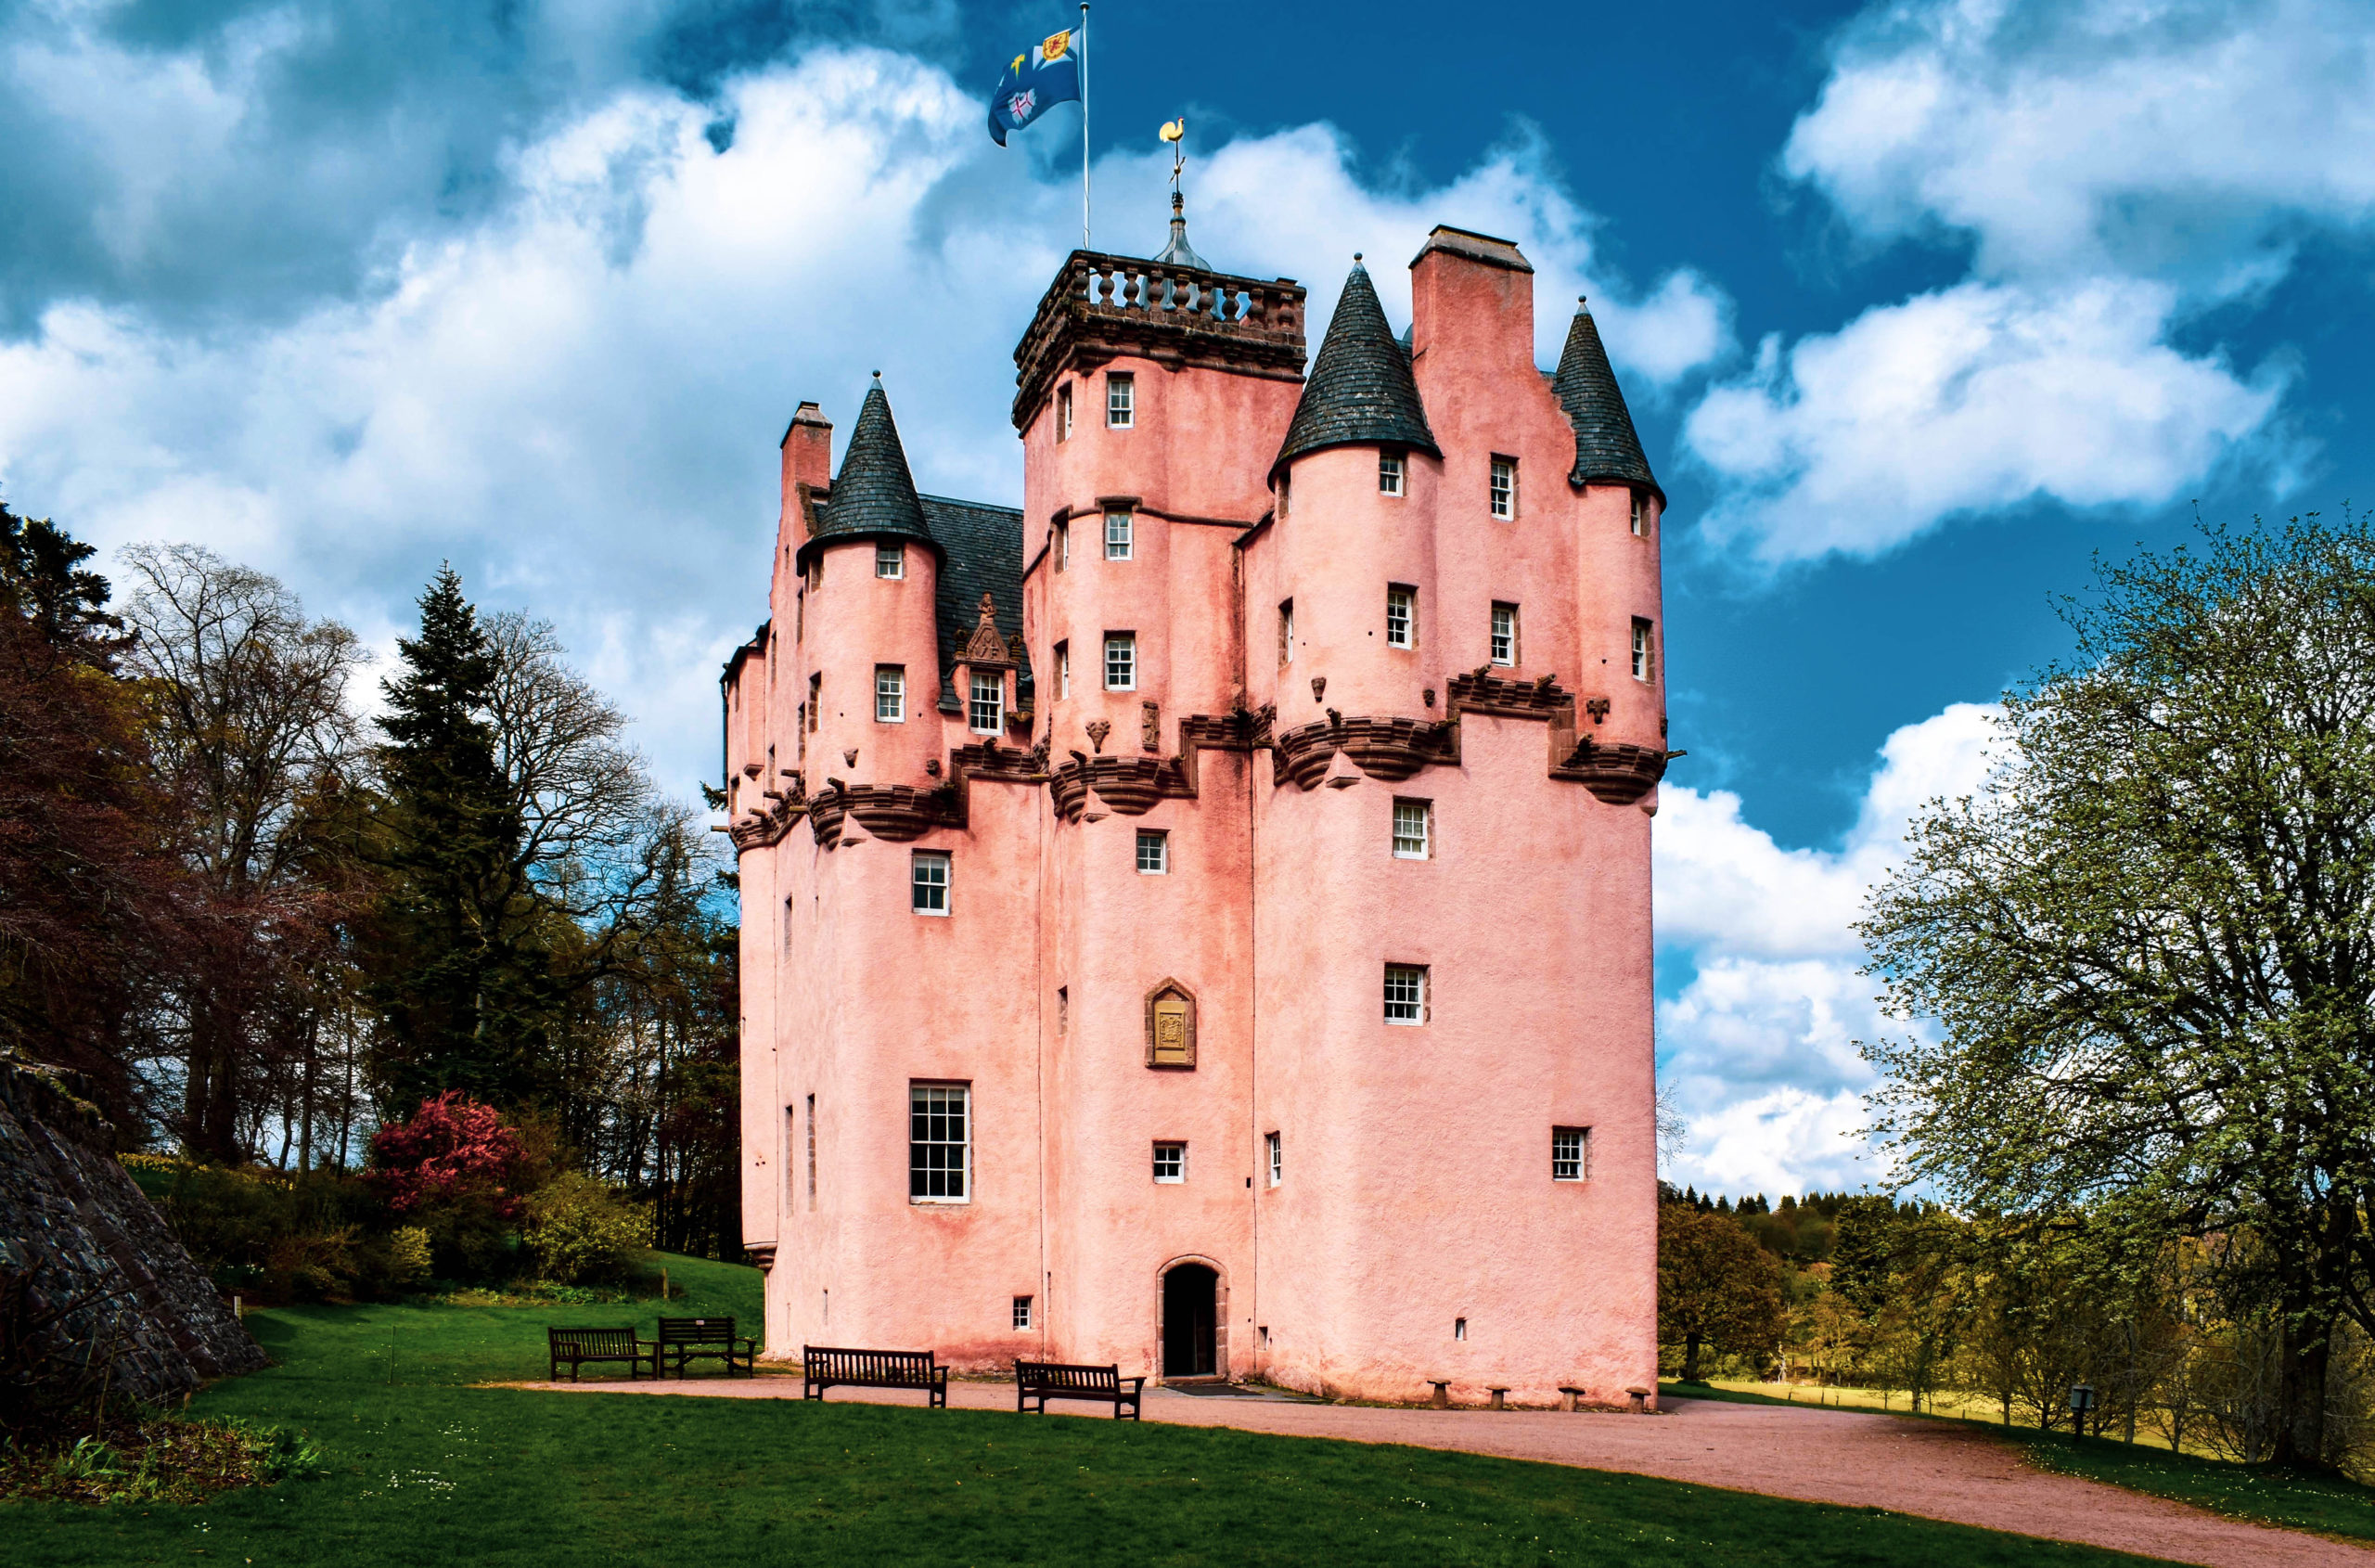 Craigievar Castle is one famous site the National Trust for Scotland looks after